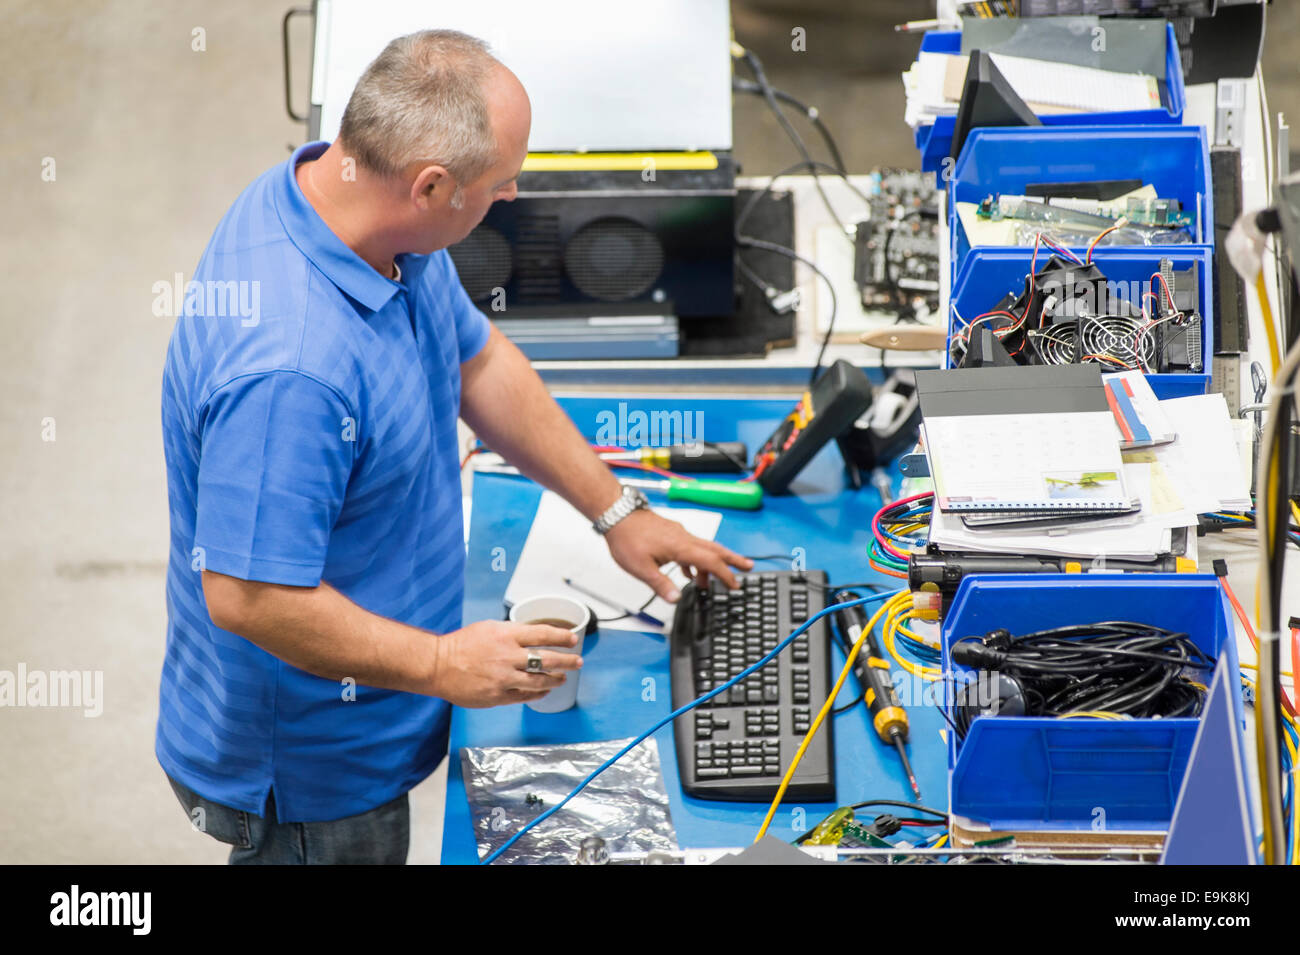 High angle view of mature male engineer working at desk in computer manufacturing industry Stock Photo